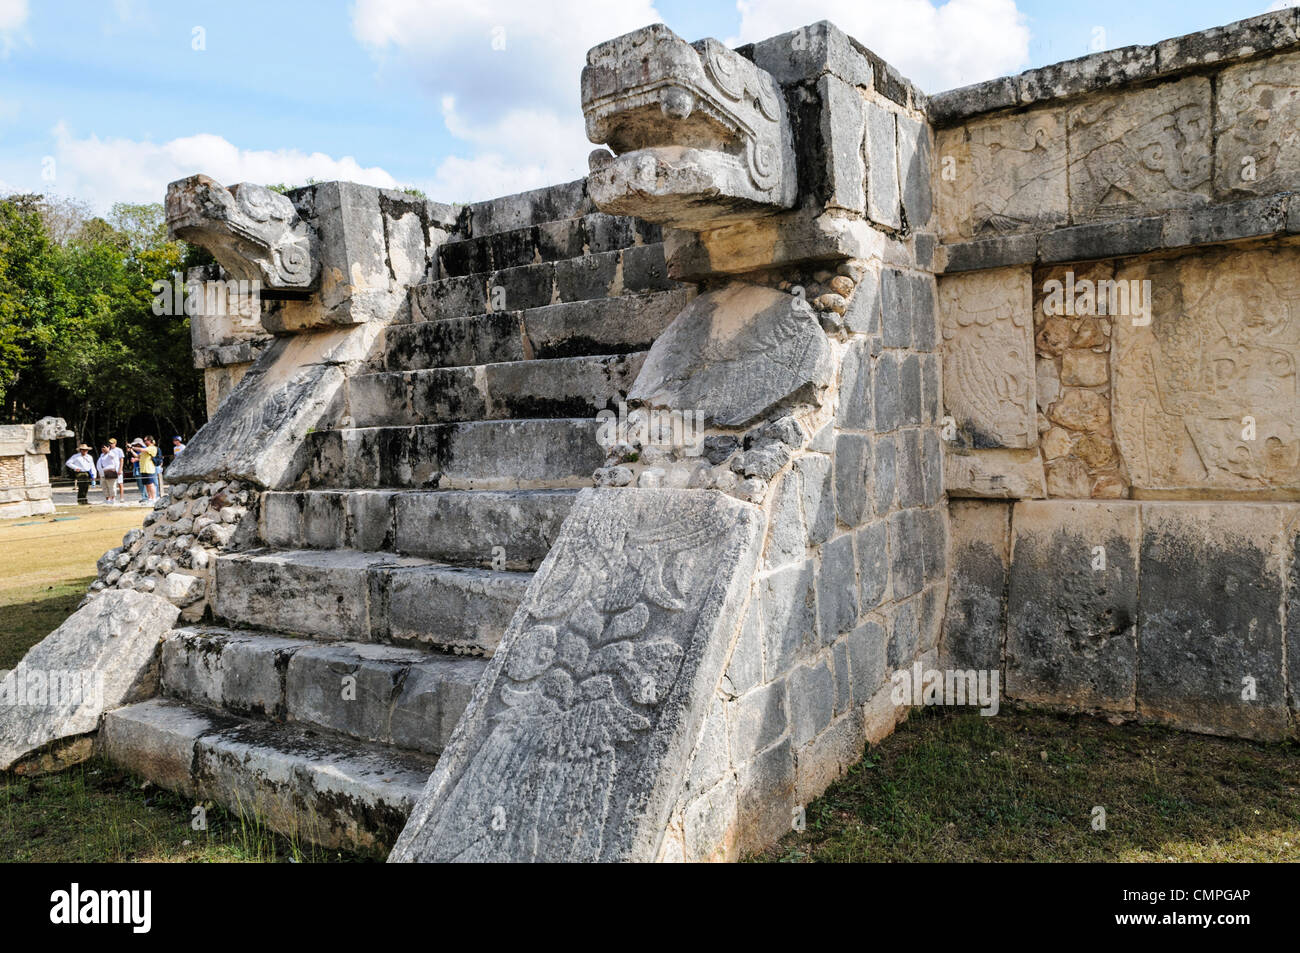 CHICHEN ITZA, Mexico - Stone stairs leading to the top of a ceremonial platform, with carved jaguar heads guarding either side, at Chichen Itza Archological Zone, Yucatan, Mexico. Stock Photo